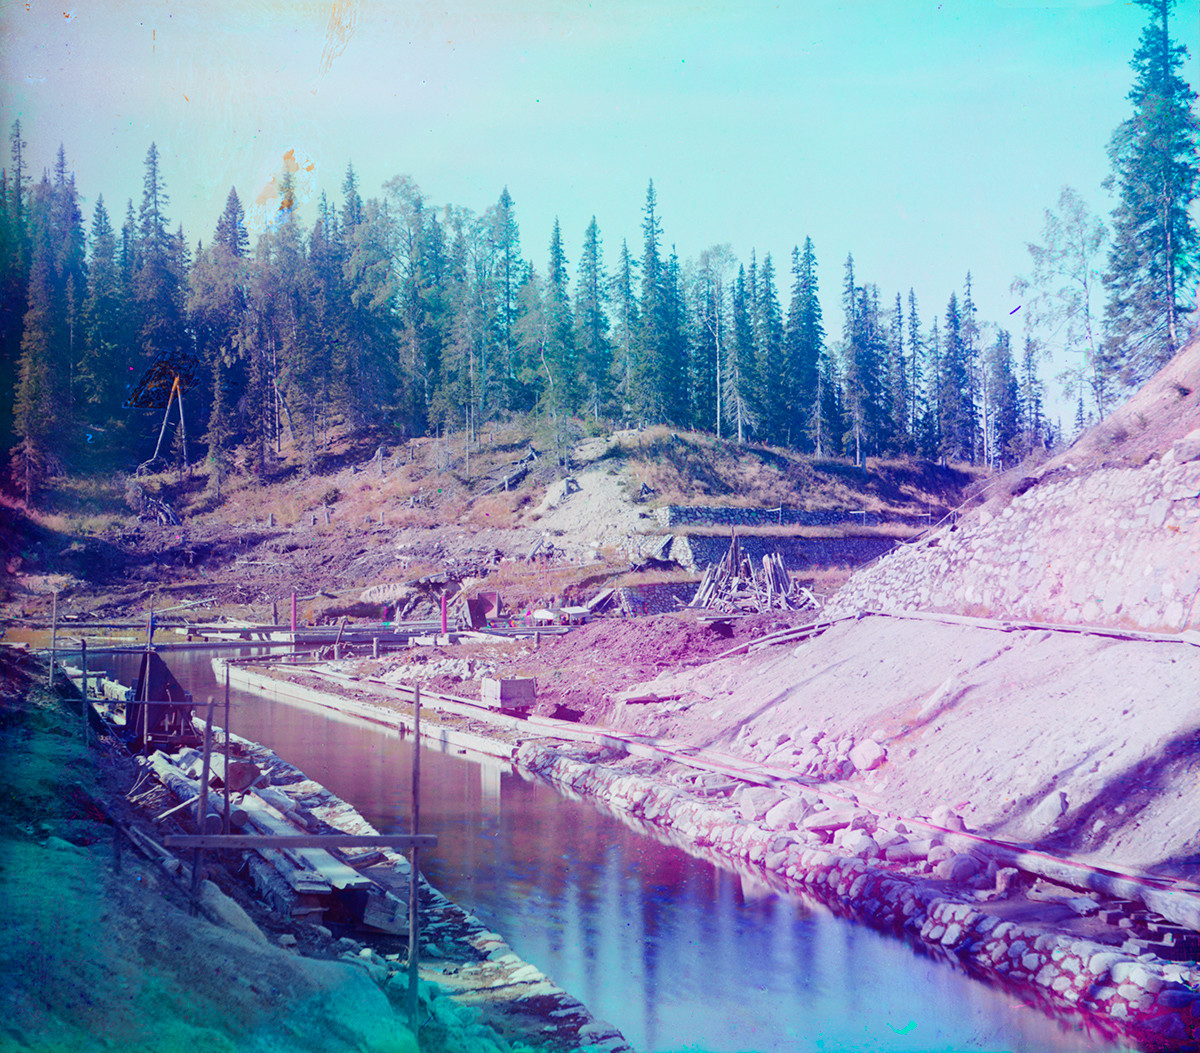 Great Solovetsky Island. Boat canal under construction between Long Lake & Little Red Lake. Late summer 1916   